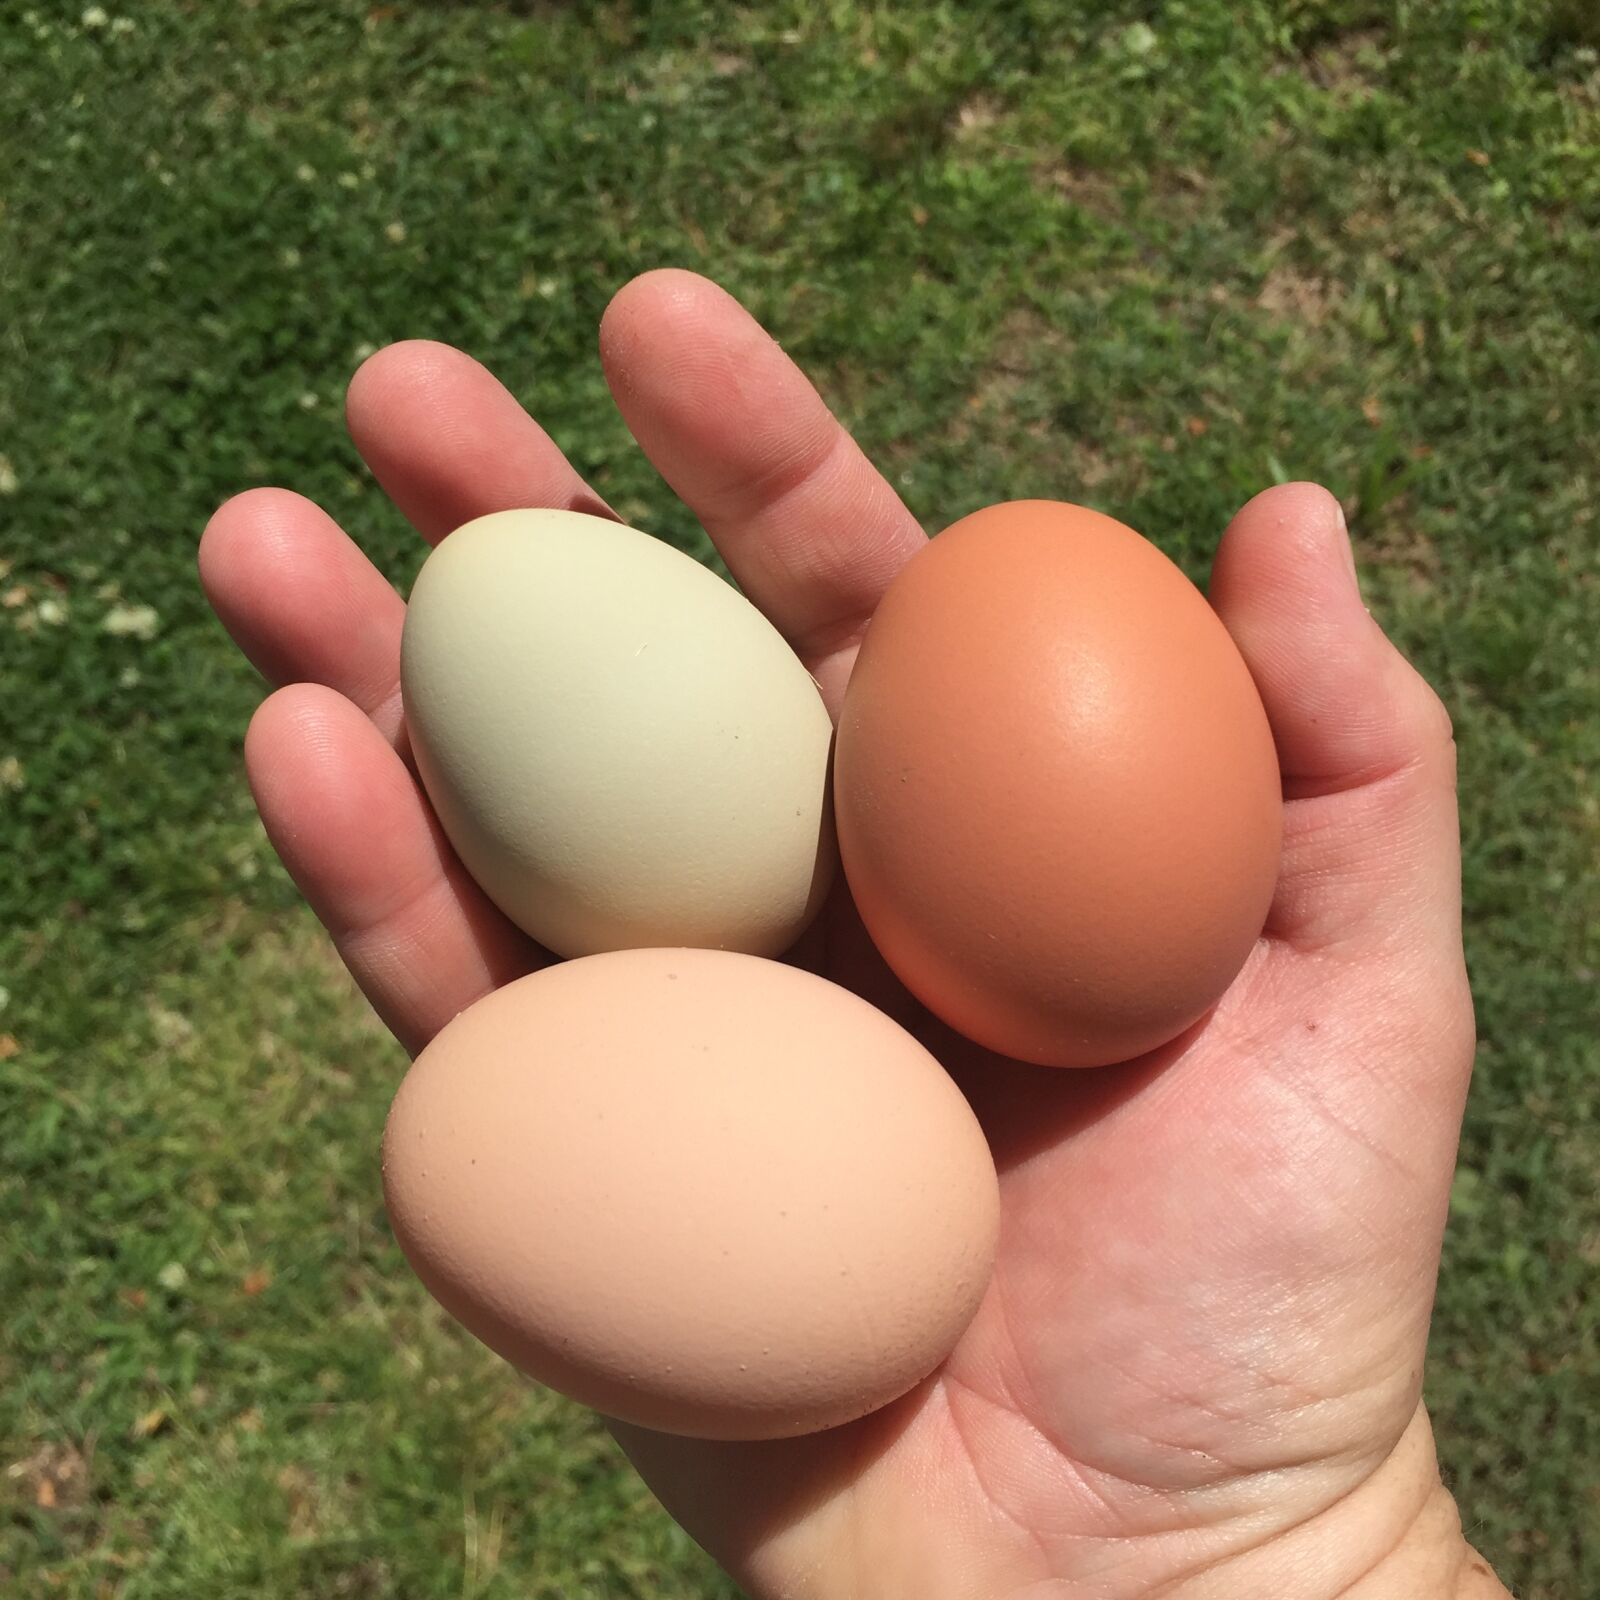 Apple iPhone 6 sample photo. Eggs, chickens, backyard chickens photography